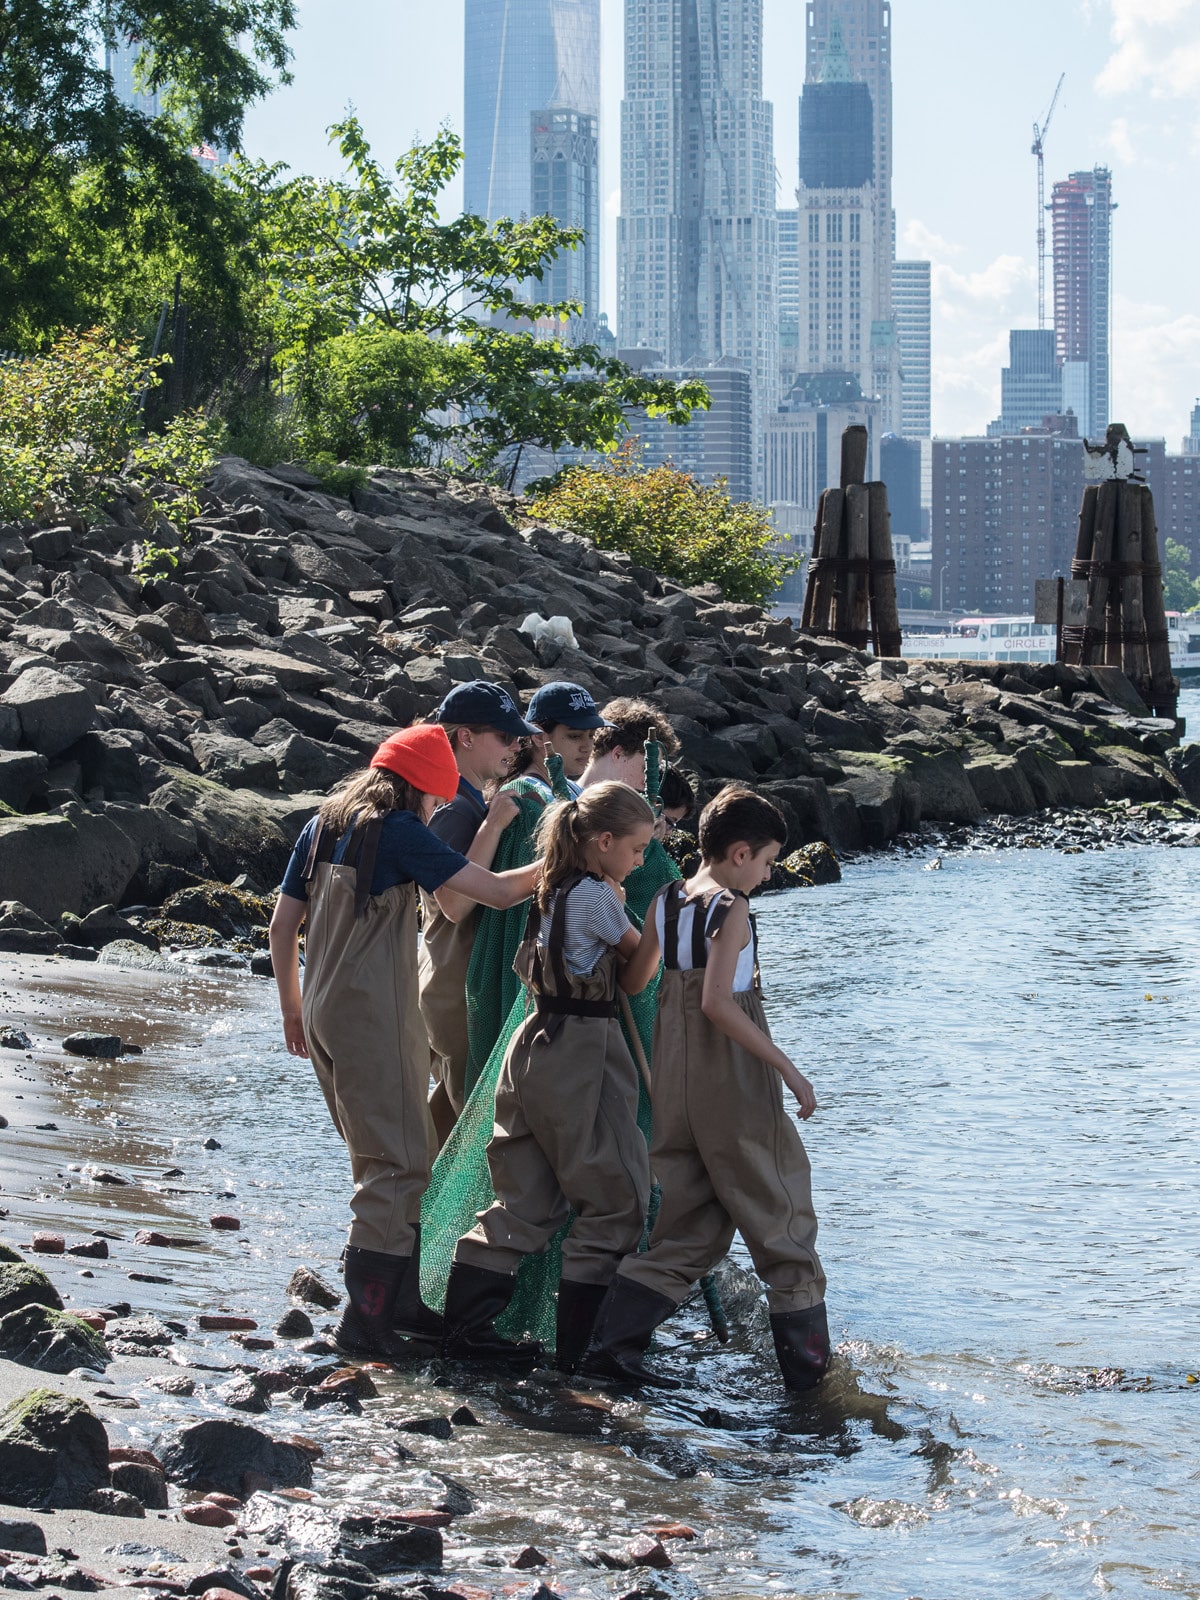 Group of children in fishing waders walking into the water with a large net for seine fishing on a sunny day.